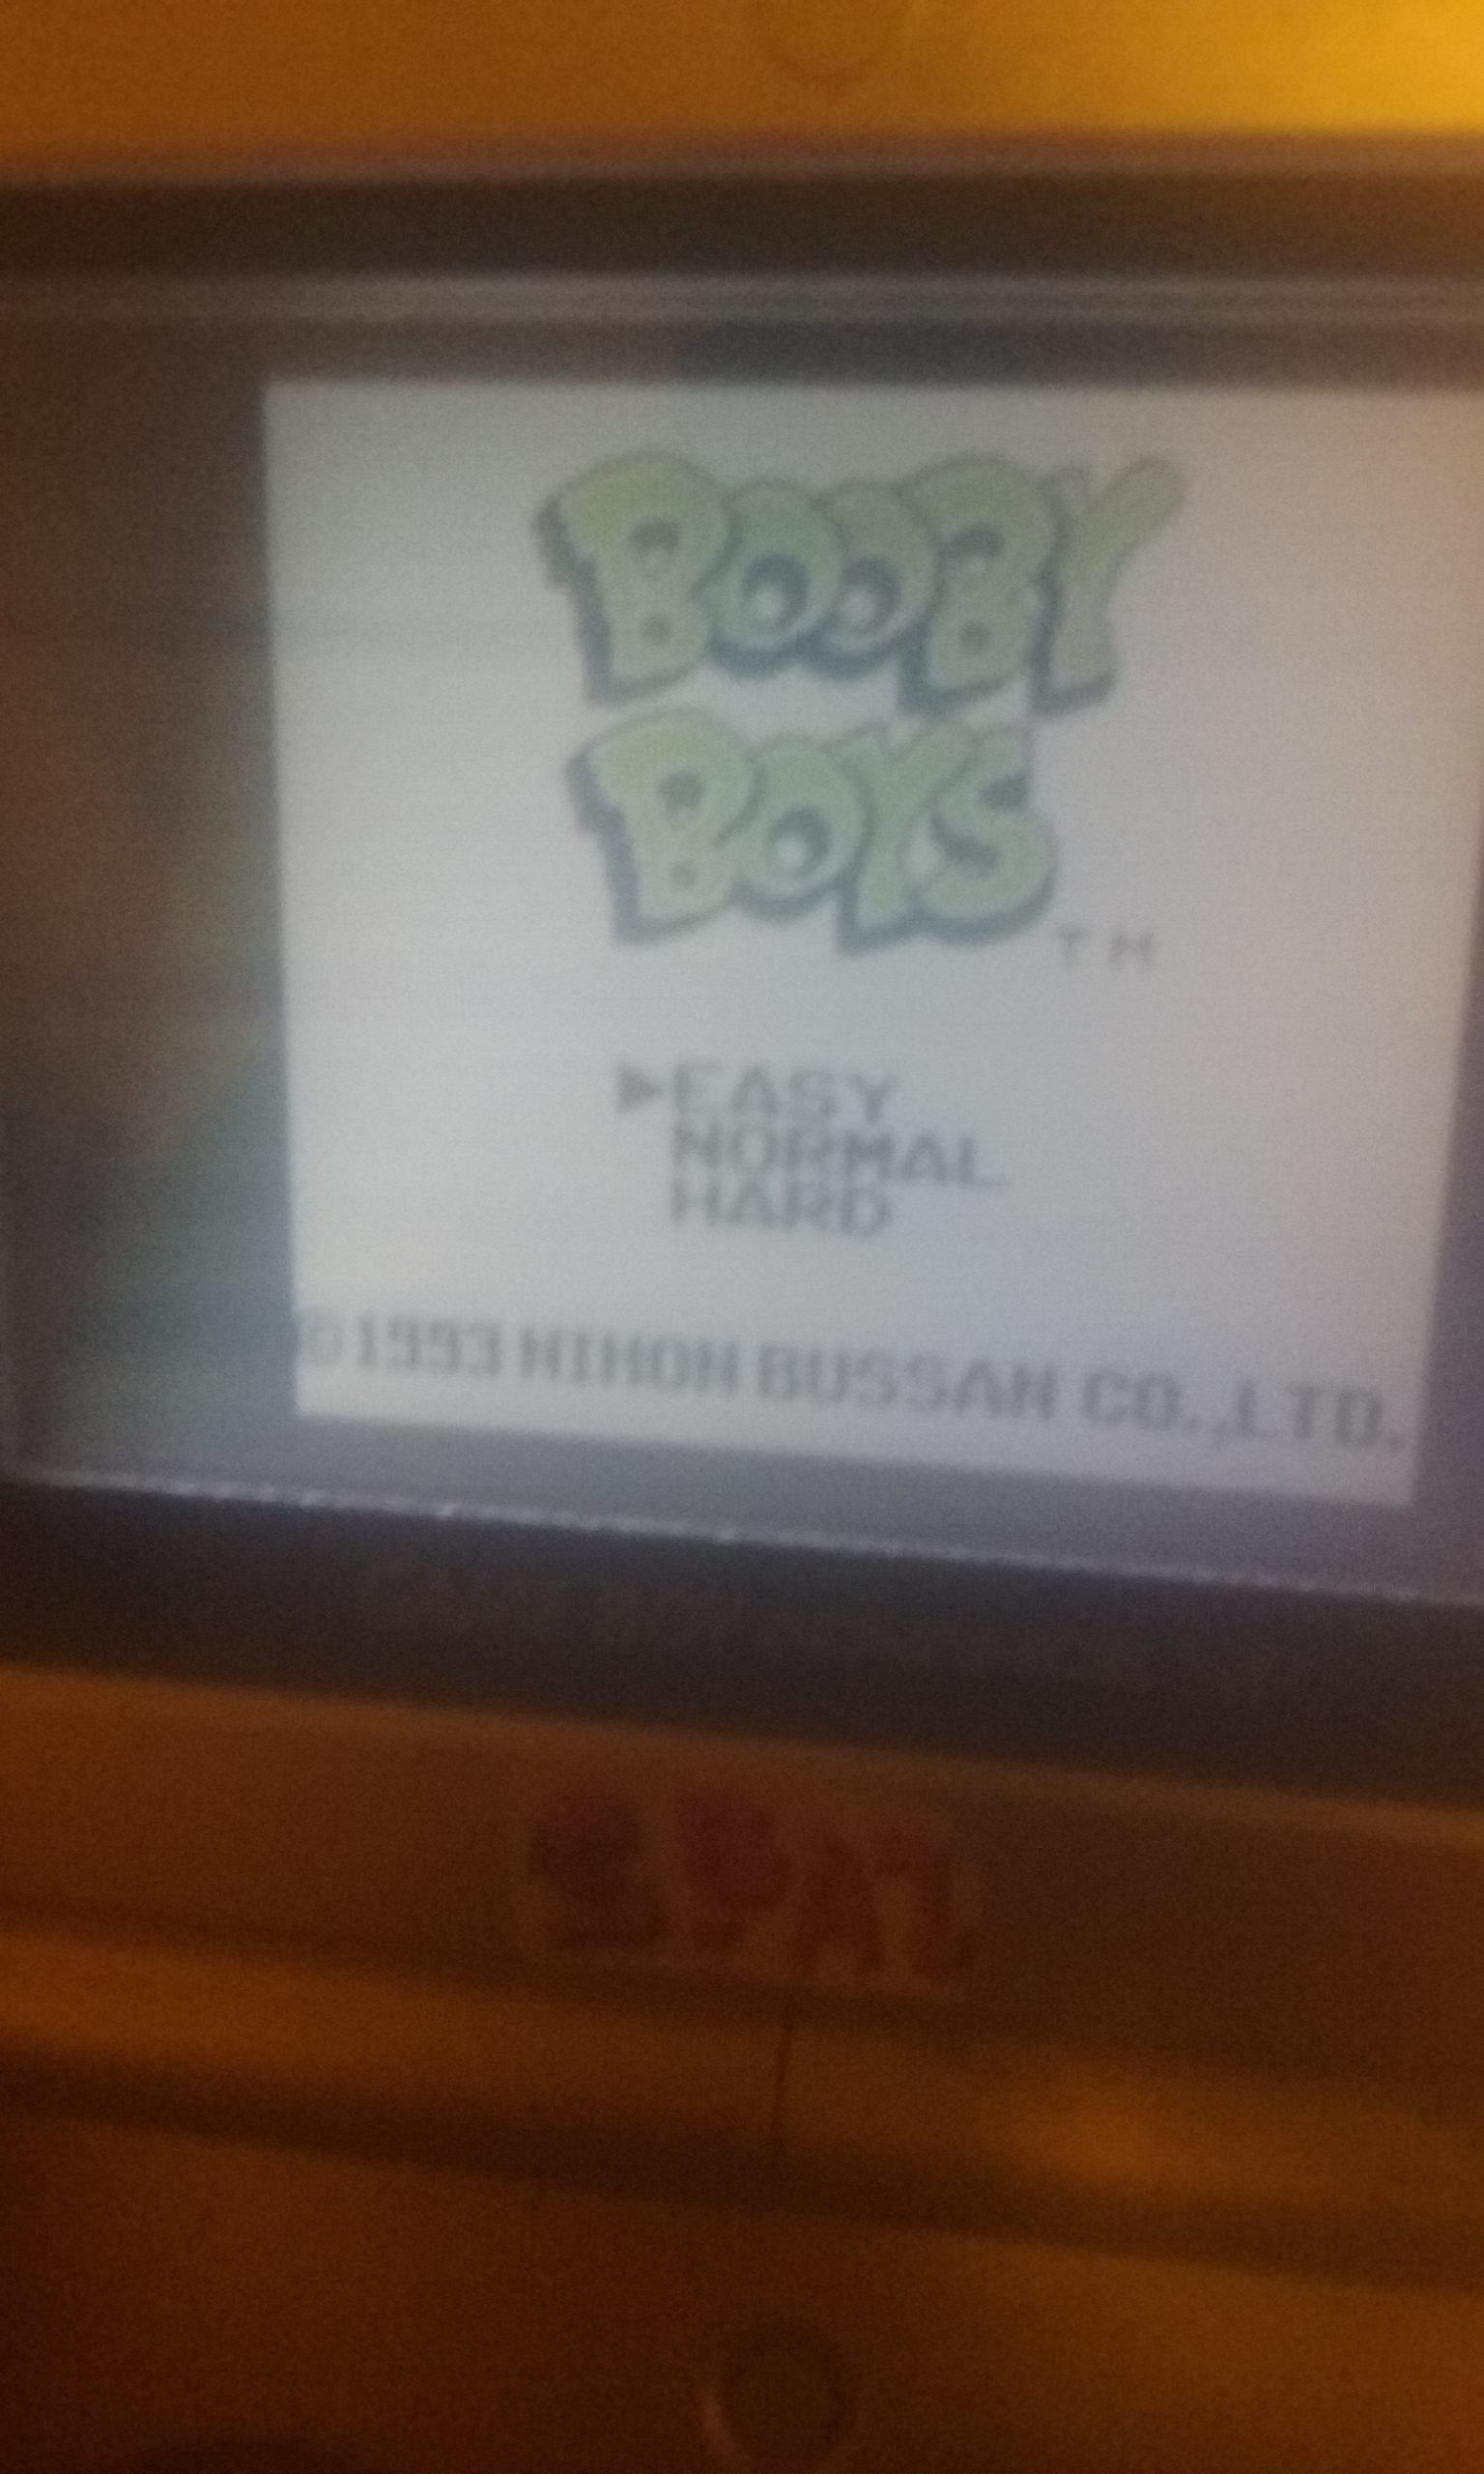 S.BAZ: Booby Boys [Easy] (Game Boy) 29,900 points on 2018-12-24 12:20:13